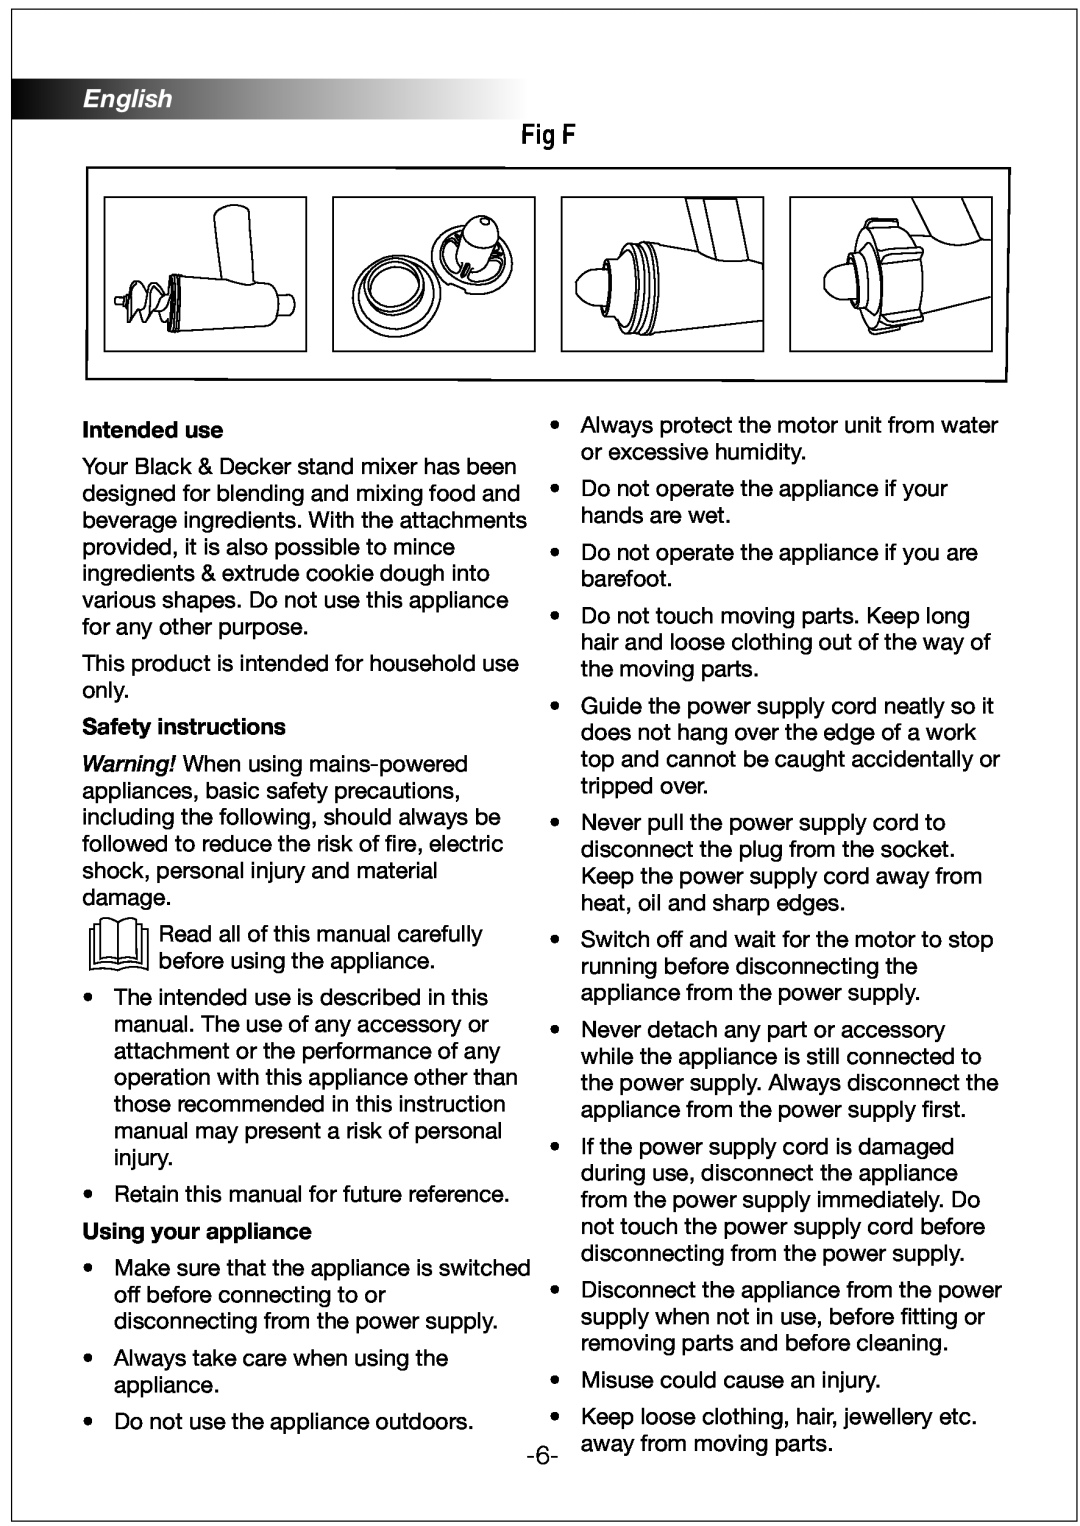 Black & Decker PRSM600 manual Fig F, English, Intended use, Safety instructions, Using your appliance 